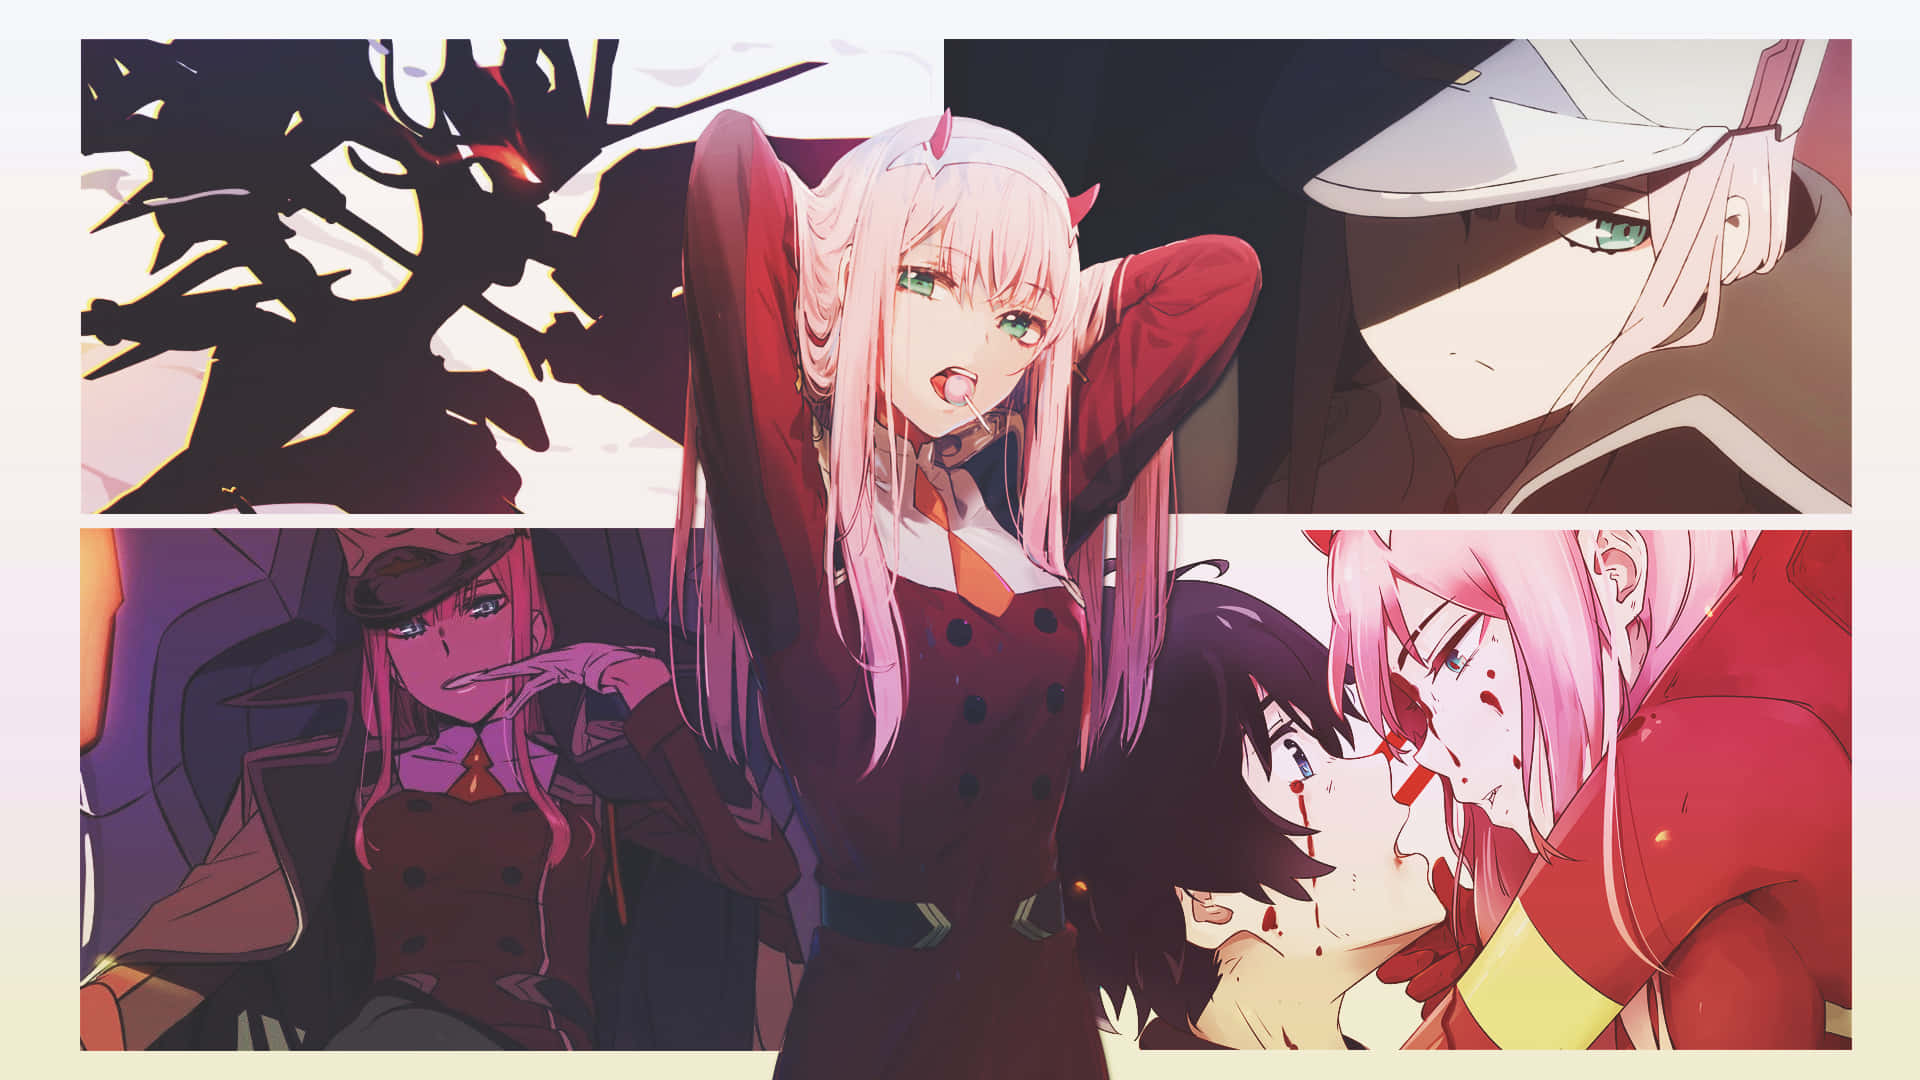 Squad of pilots and their Franxx ready to take on their mission